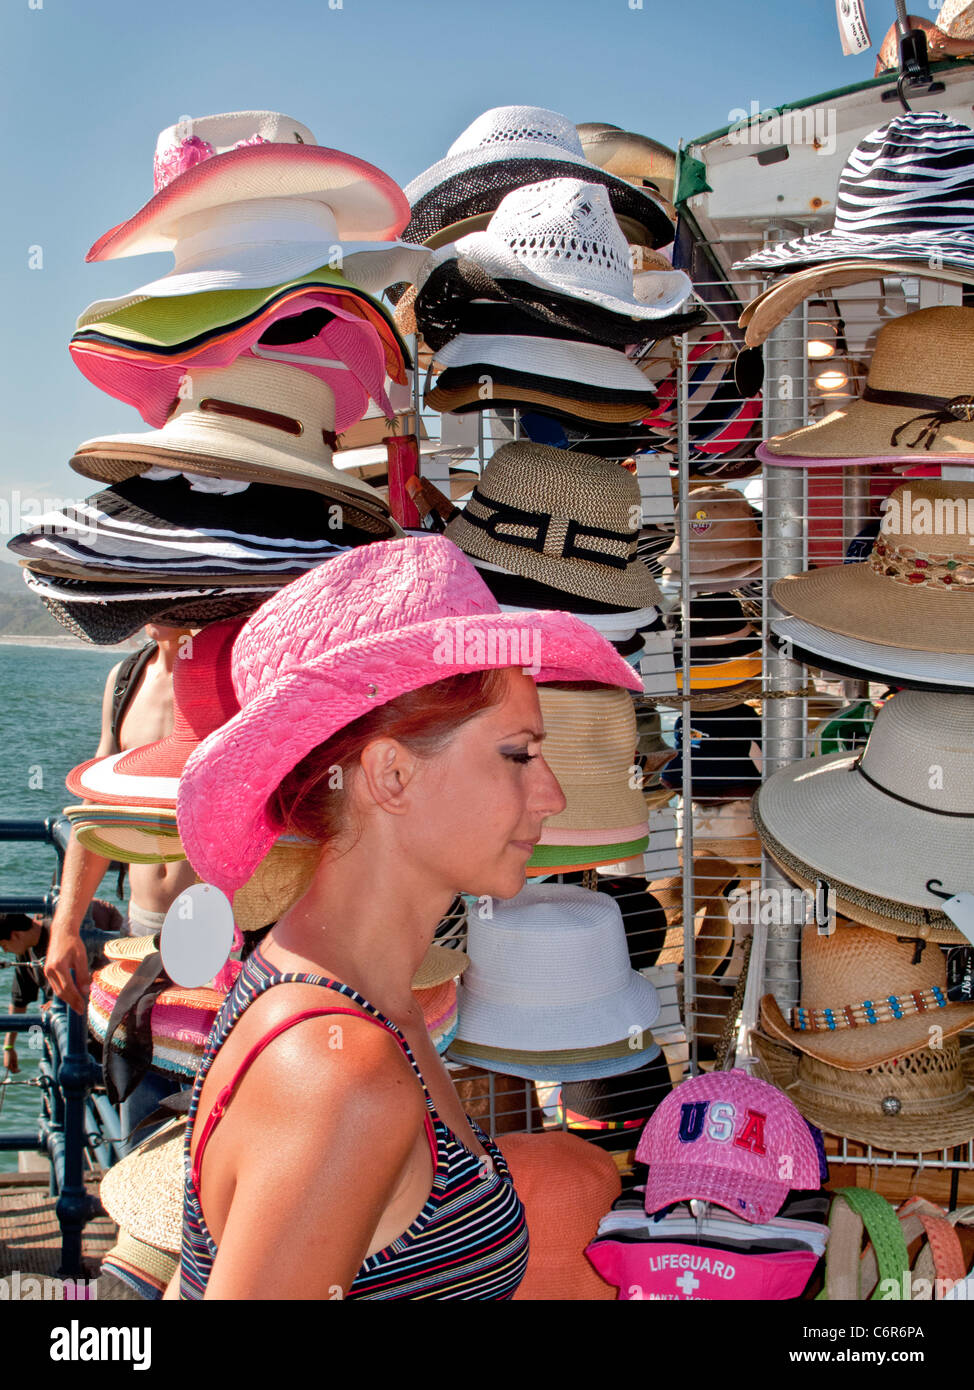 A saleswoman models her merchandise at a hat stand on Santa Monica Pier. Stock Photo